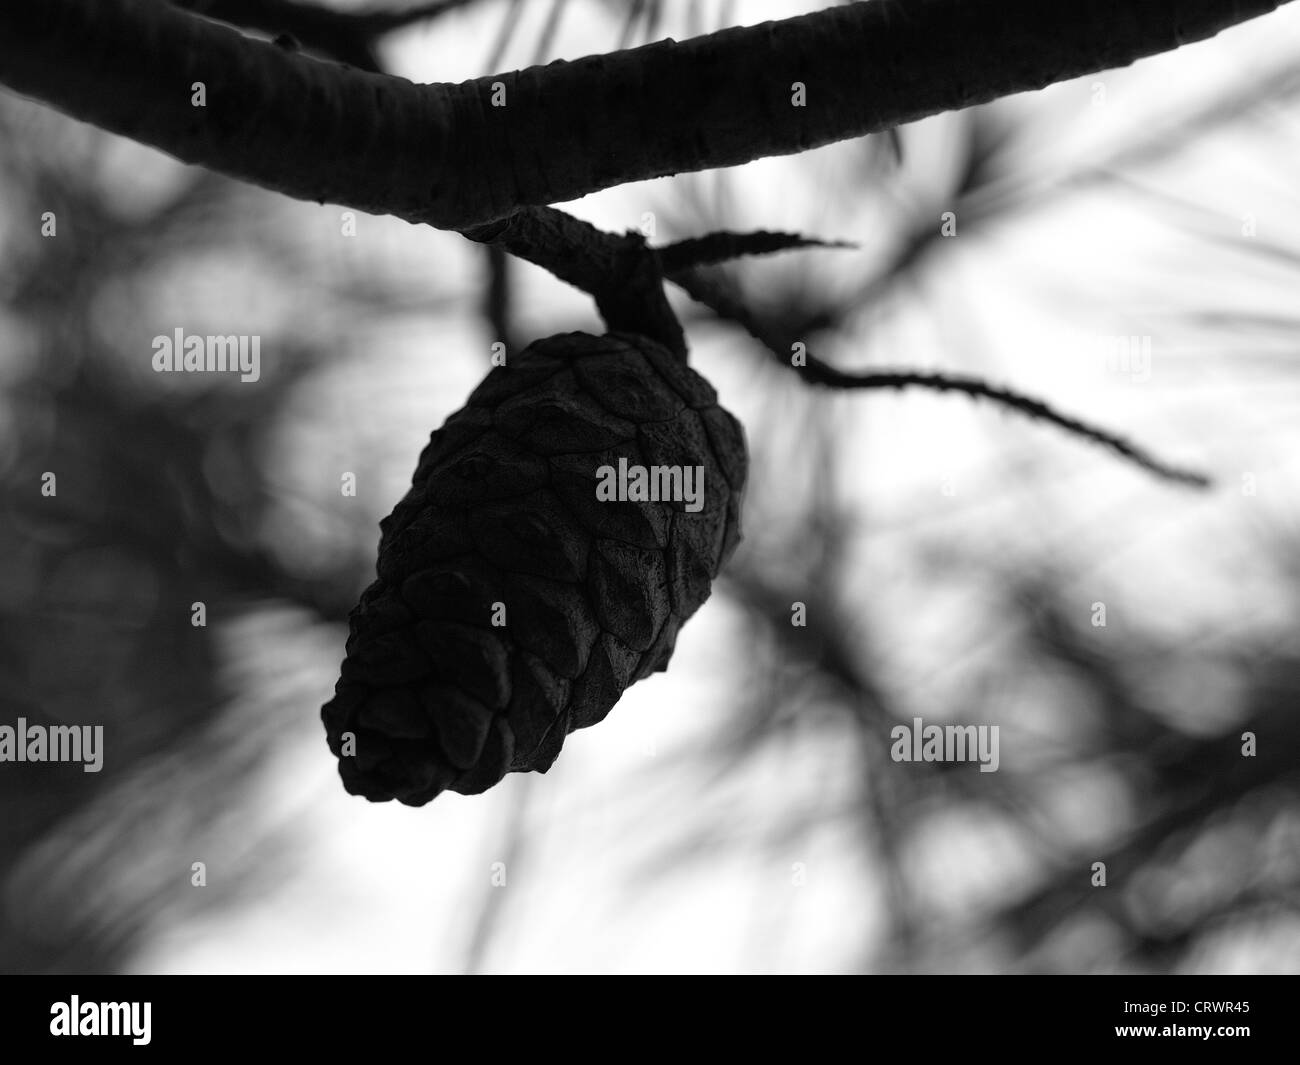 A cone on a pine tree. Close-up, black and white photography. Stock Photo